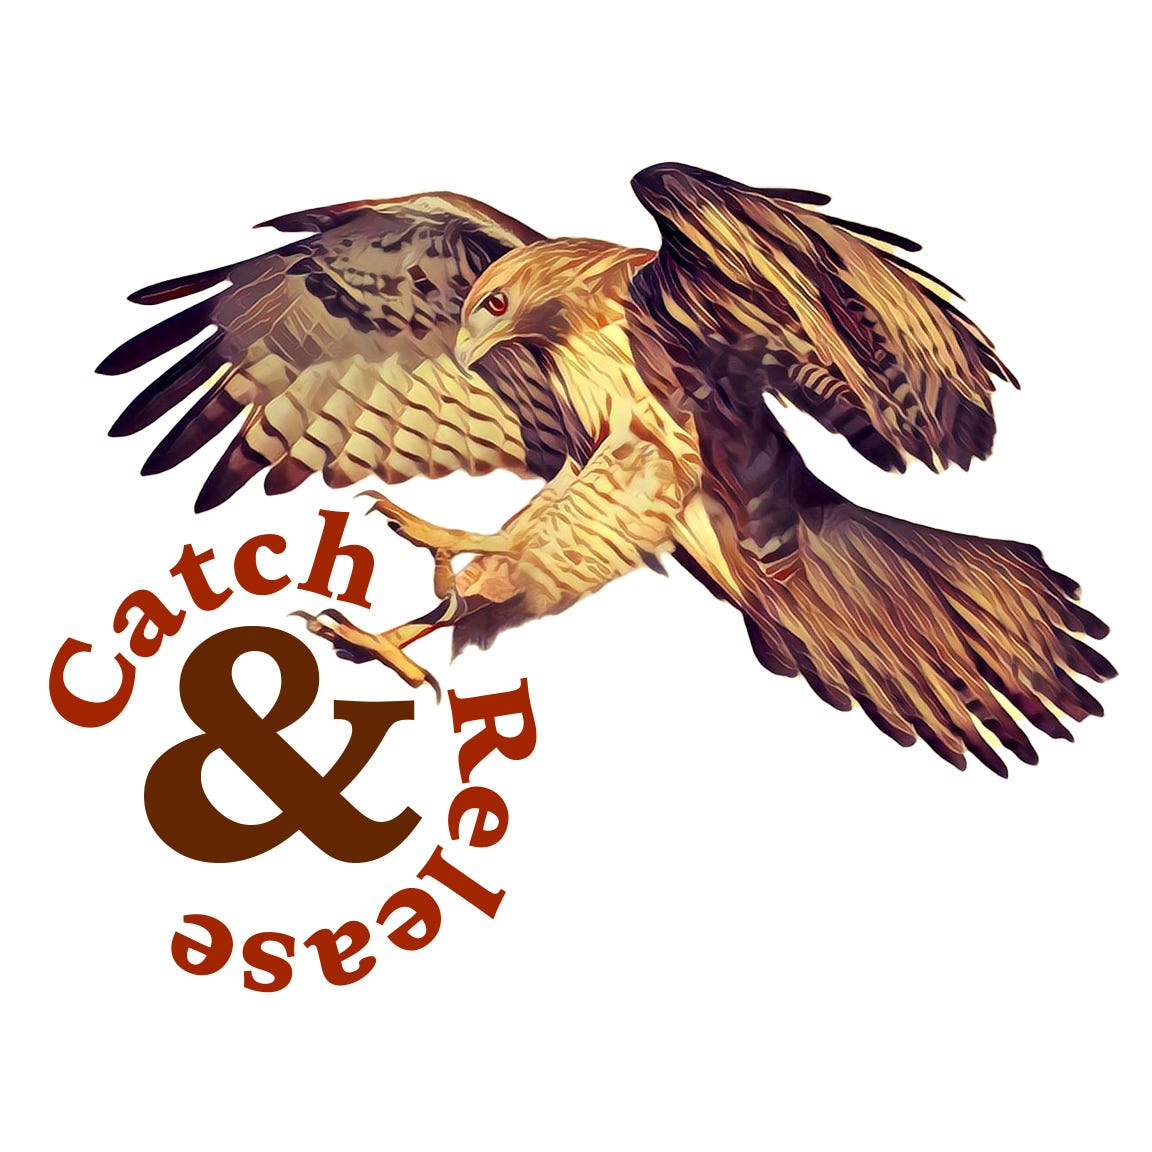 Artwork for Catch & Release